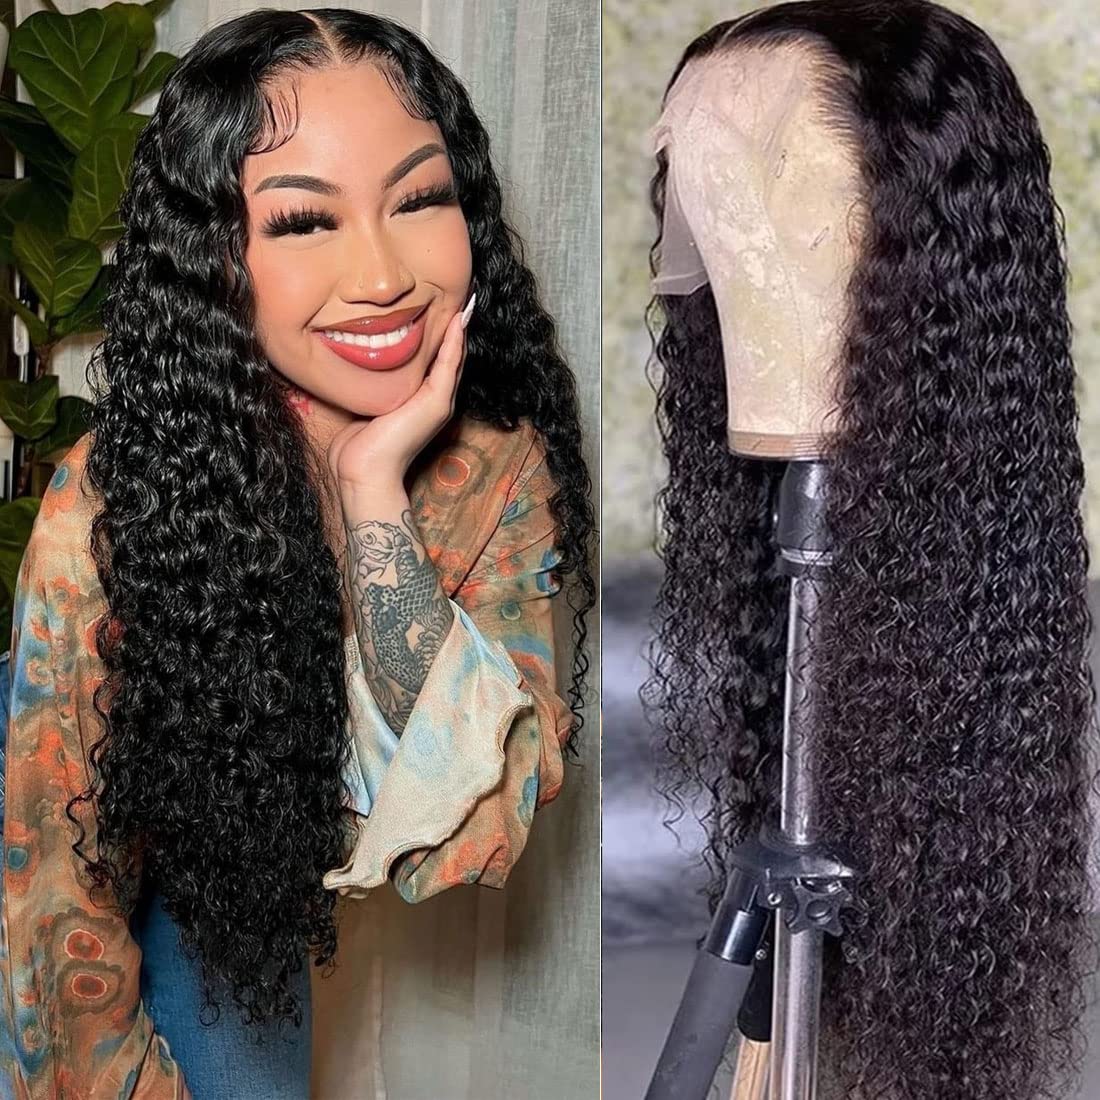 4GIRL4EVER Deep Wave Lace Front Wigs Human Hair 180% Denisty 13X4 Deep Wave  Frontal Wigs